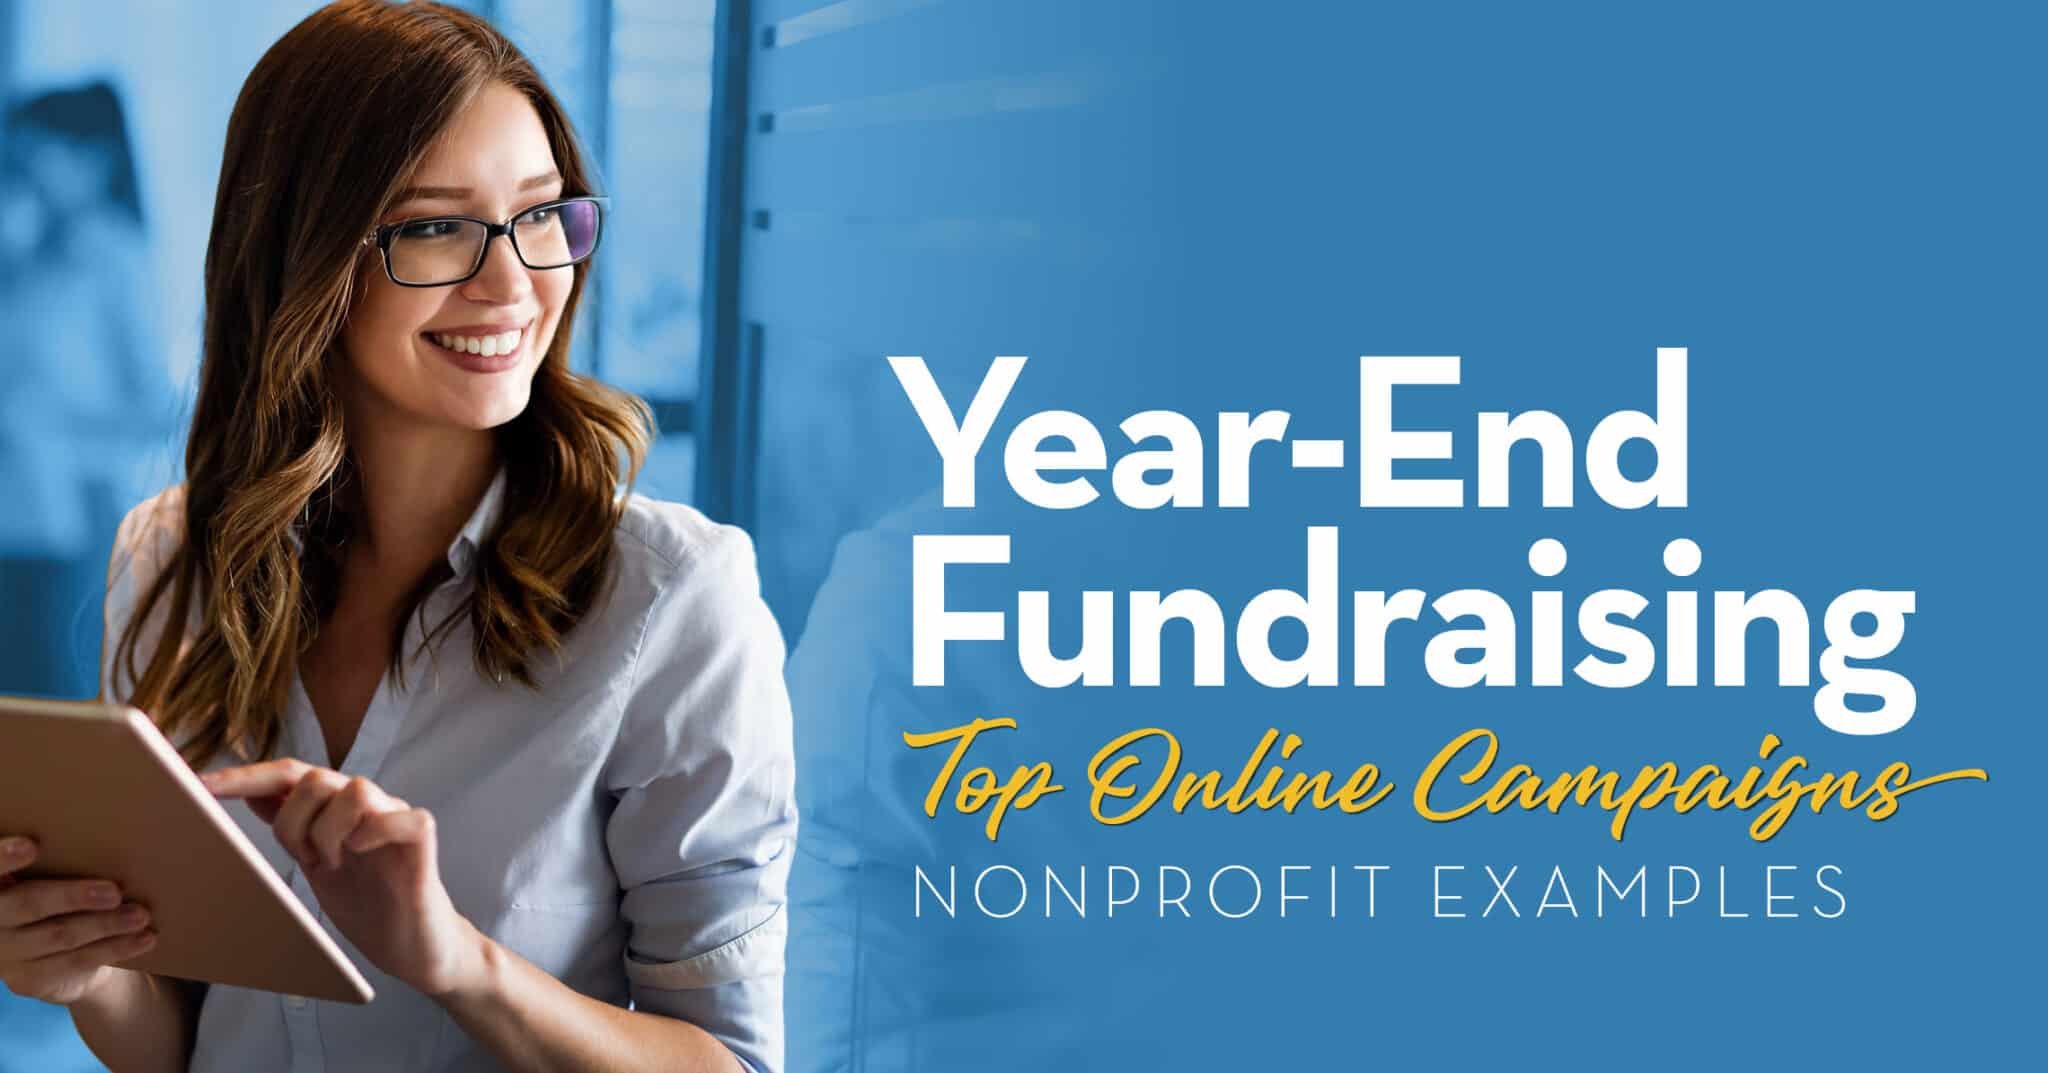 Year-End Fundraising Top Online Campaigns: Nonprofit Examples